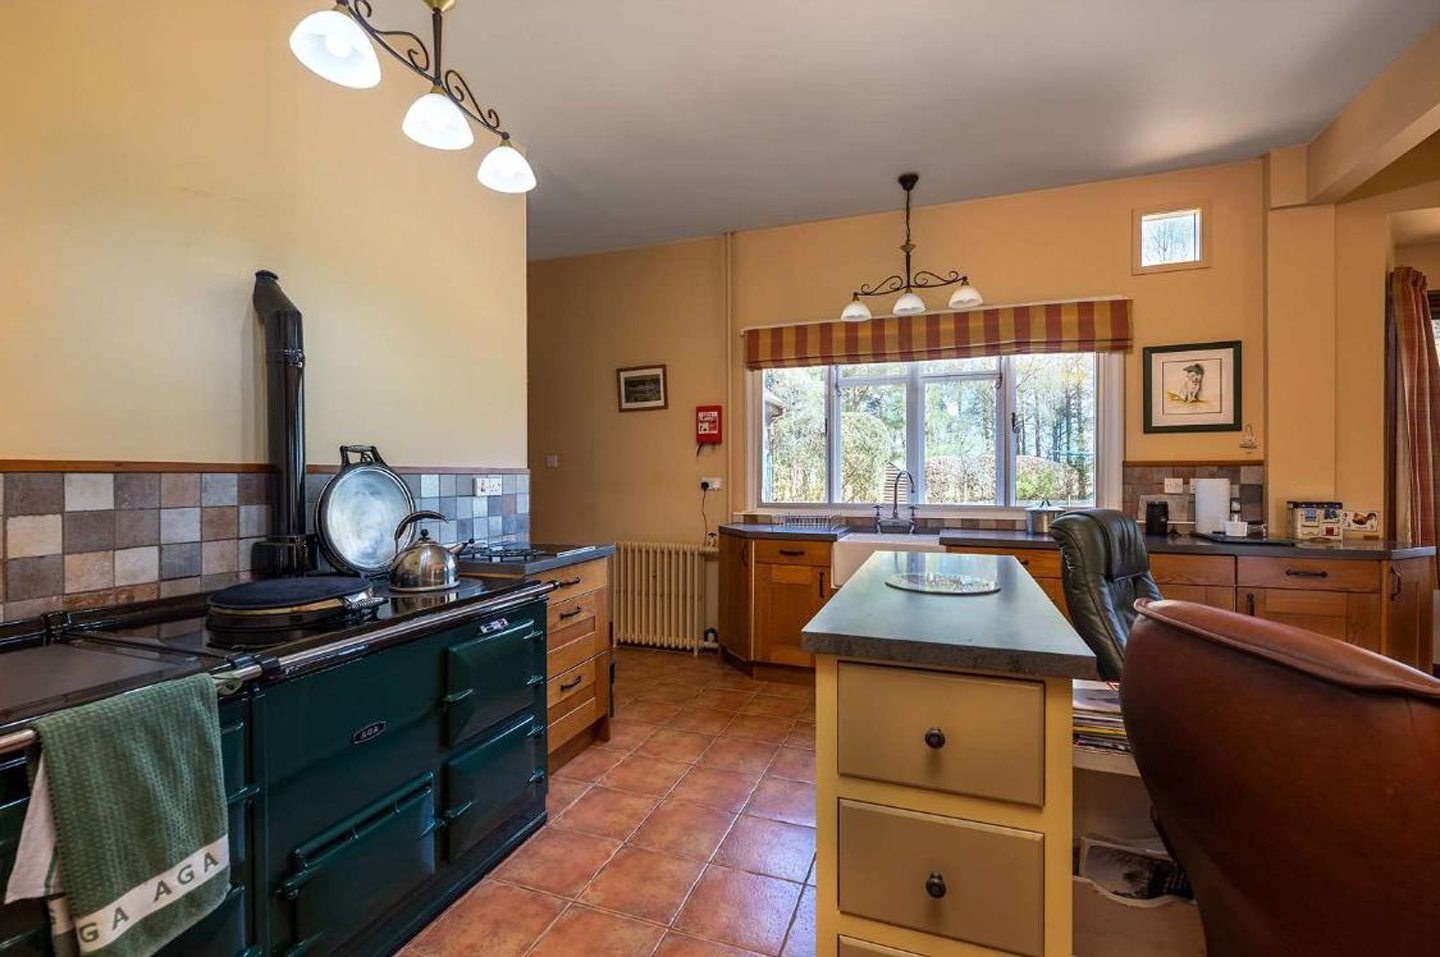 The kitchen features an Aga oven